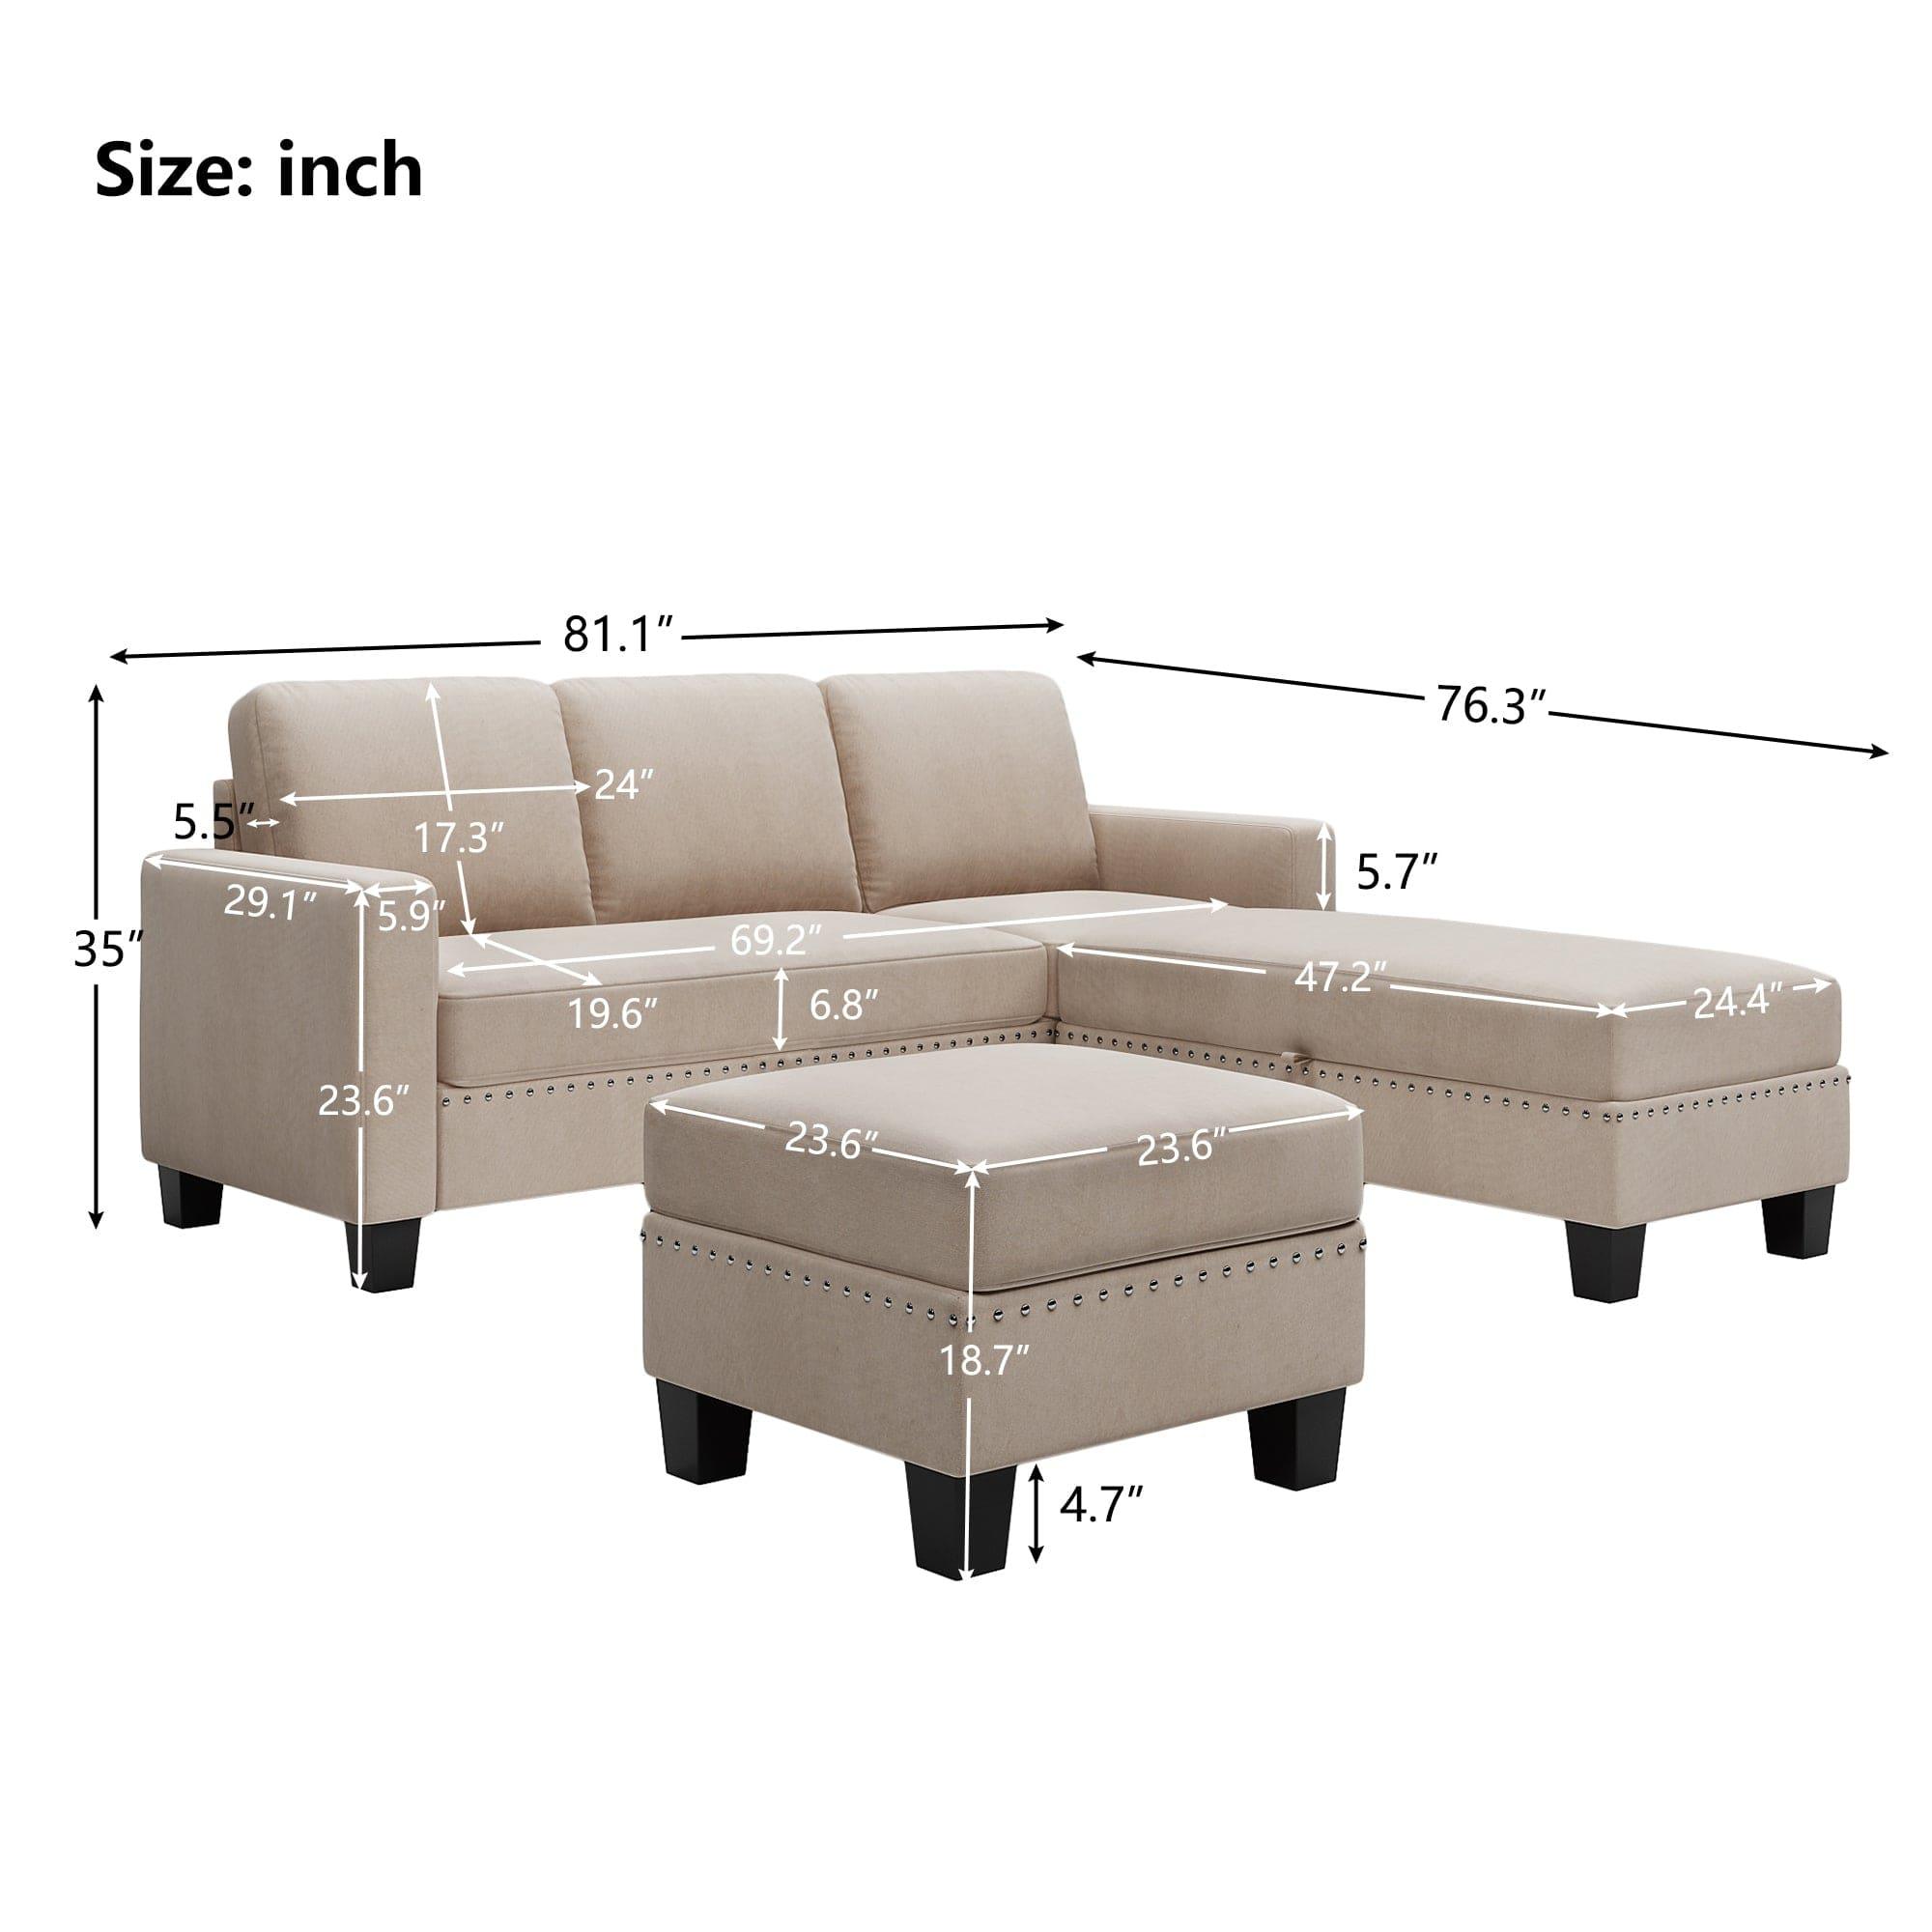 Shop [New] [VIDEO provided] 81.1*76.3*35" Reversible Sectional Couch with Storage Ottoman L-Shaped Sofa,Sectional Sofa with Chaise,Nailheaded Textured Fabric 3 pieces Sofa Set,Warm Grey Mademoiselle Home Decor